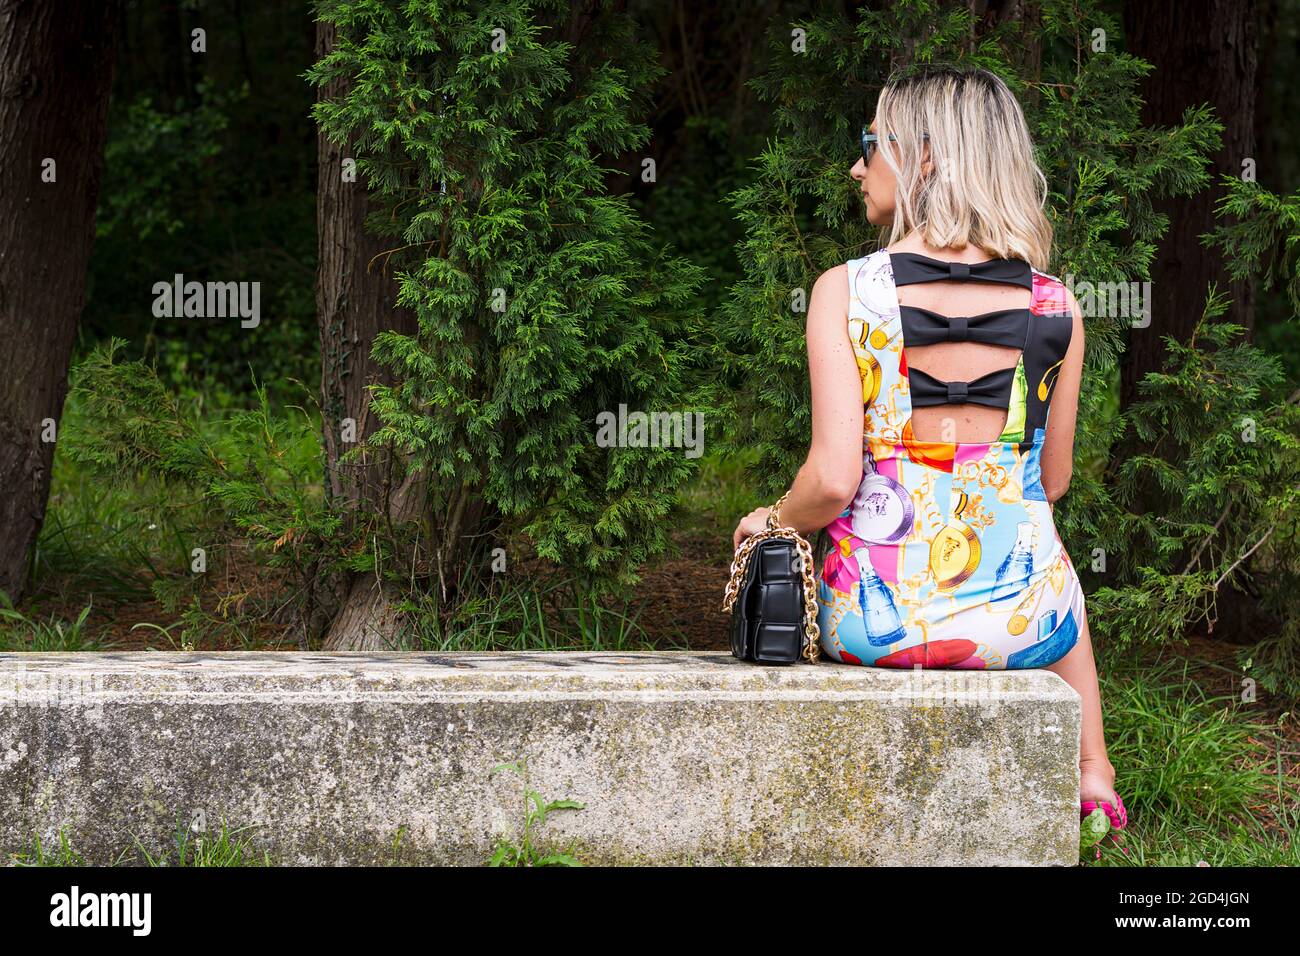 Blond woman sitting on a stone bench with her back to the camera.The model is wearing a colorful dress, pink sandals and a black bag in her hand.The p Stock Photo